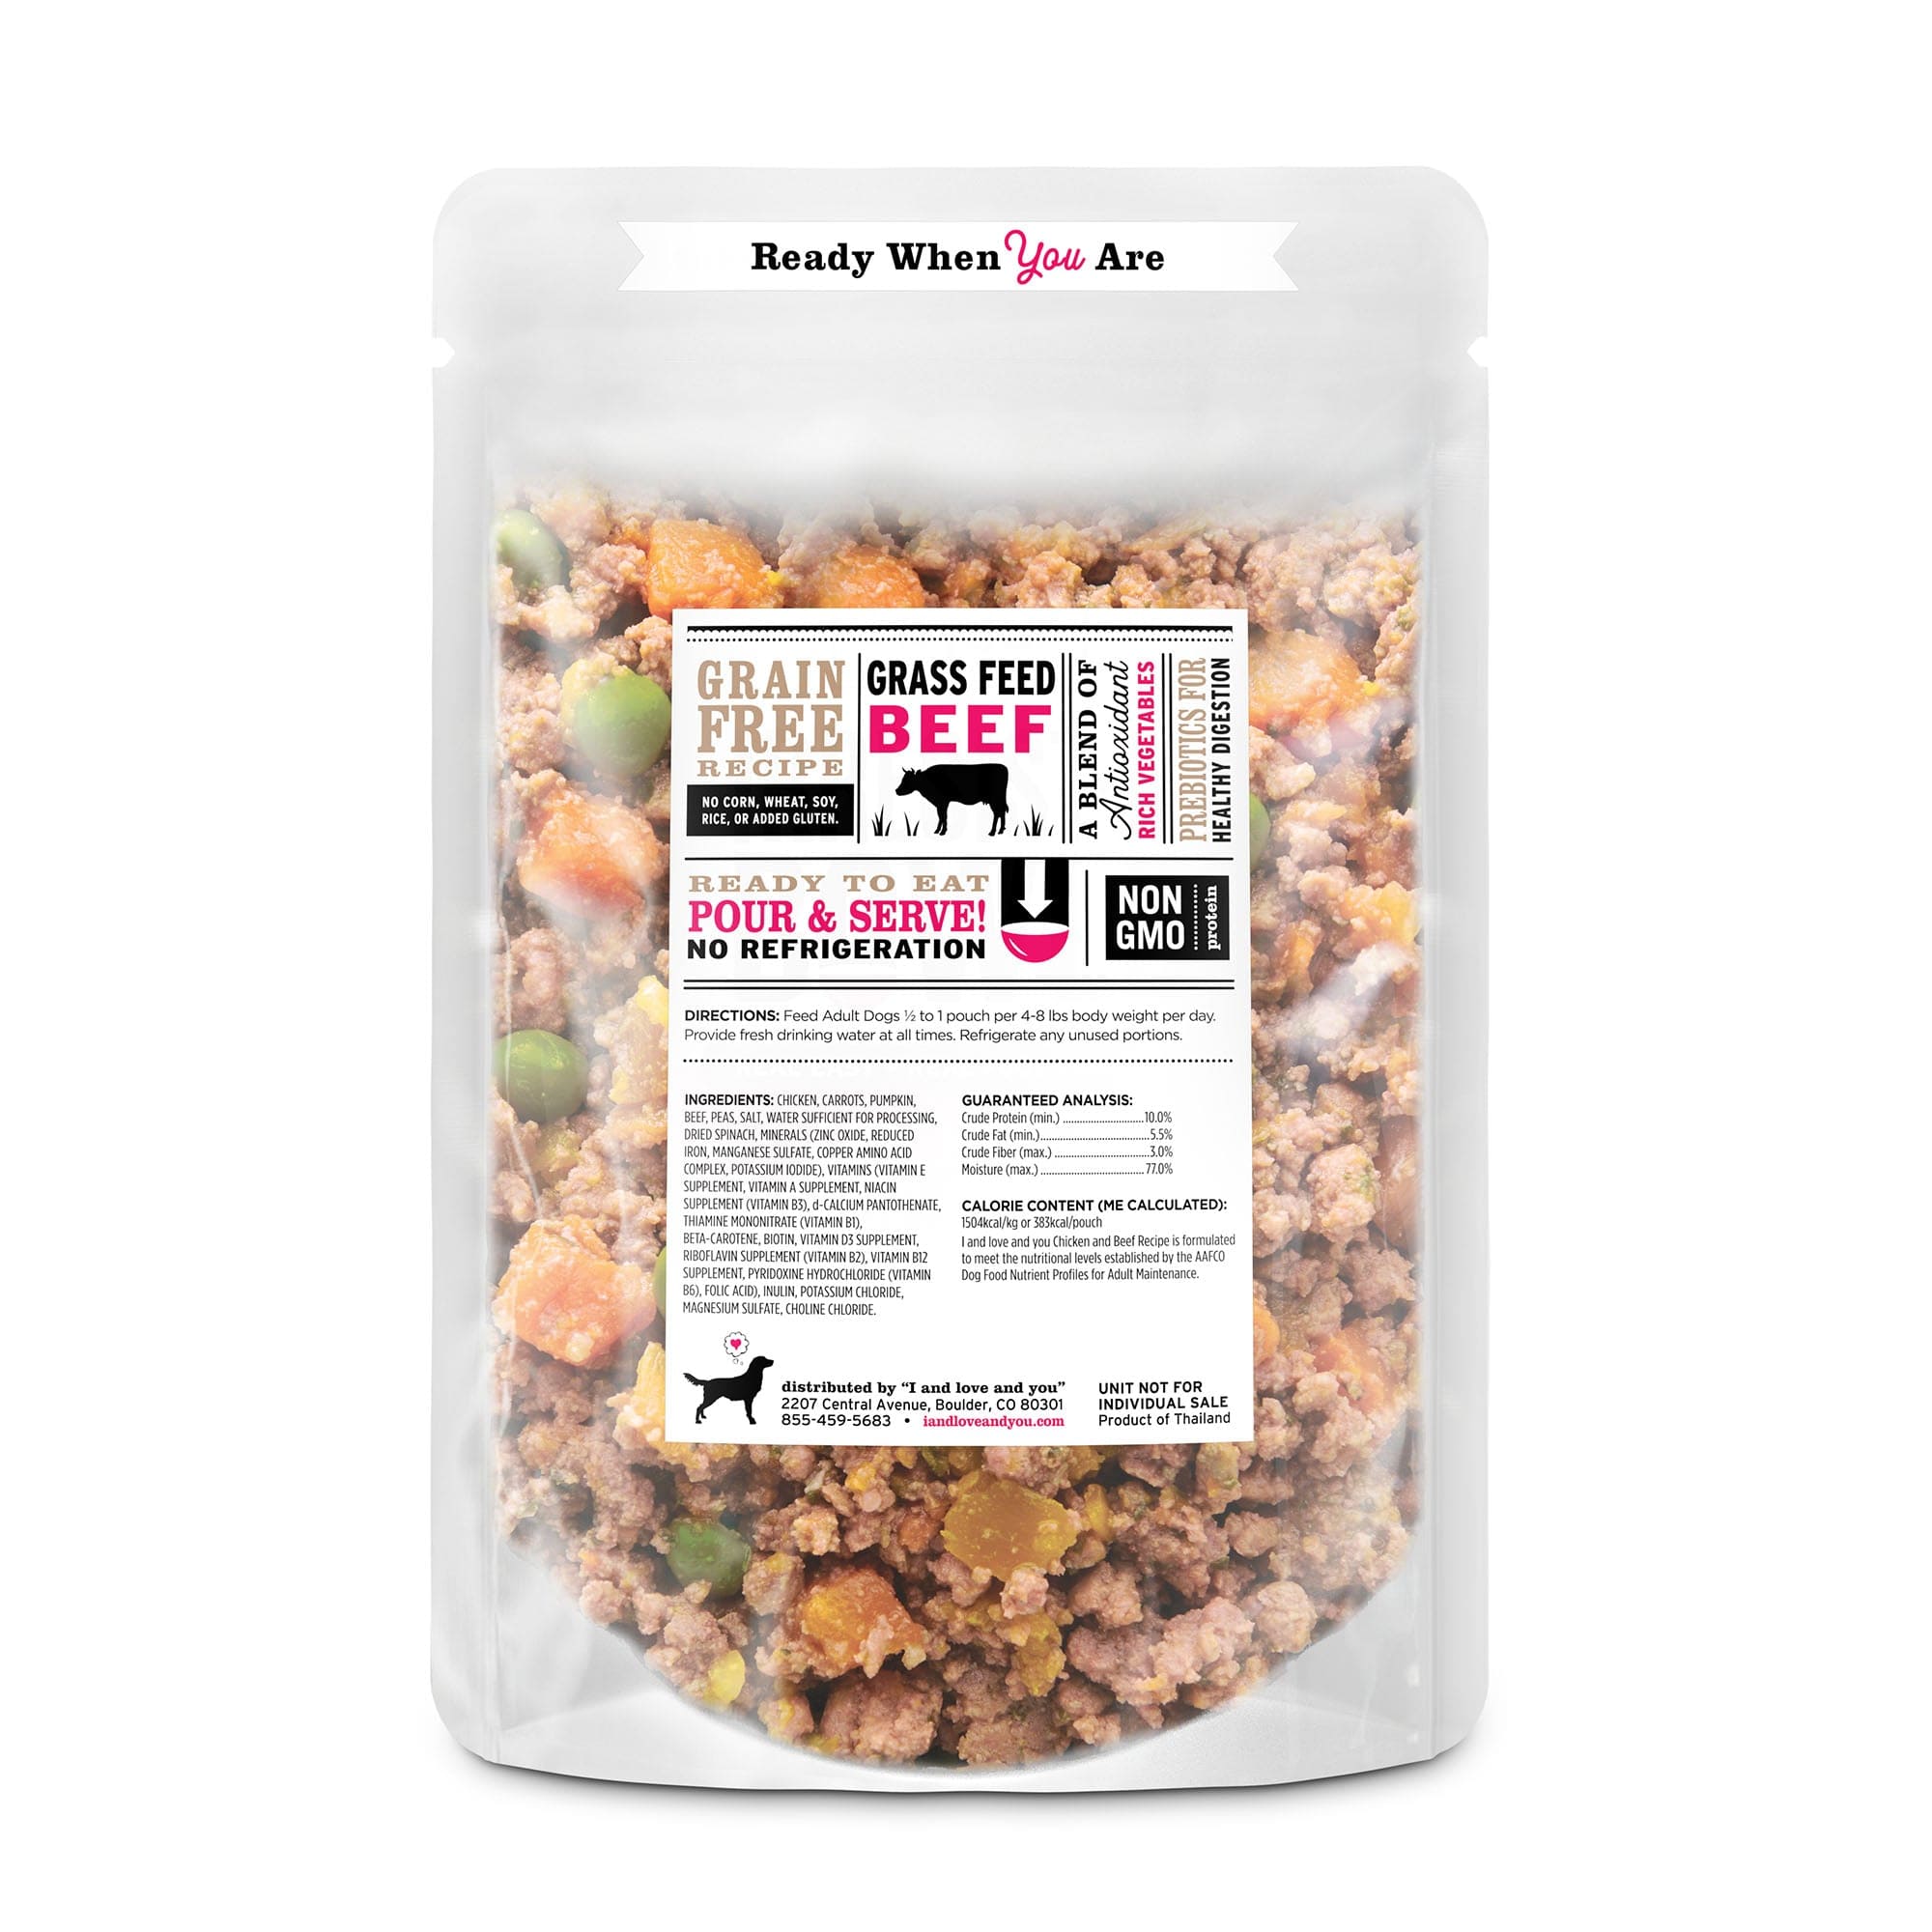 Irresist-A-Bowls pouch of homestyle savory pet food with chicken, beef, and veggies.